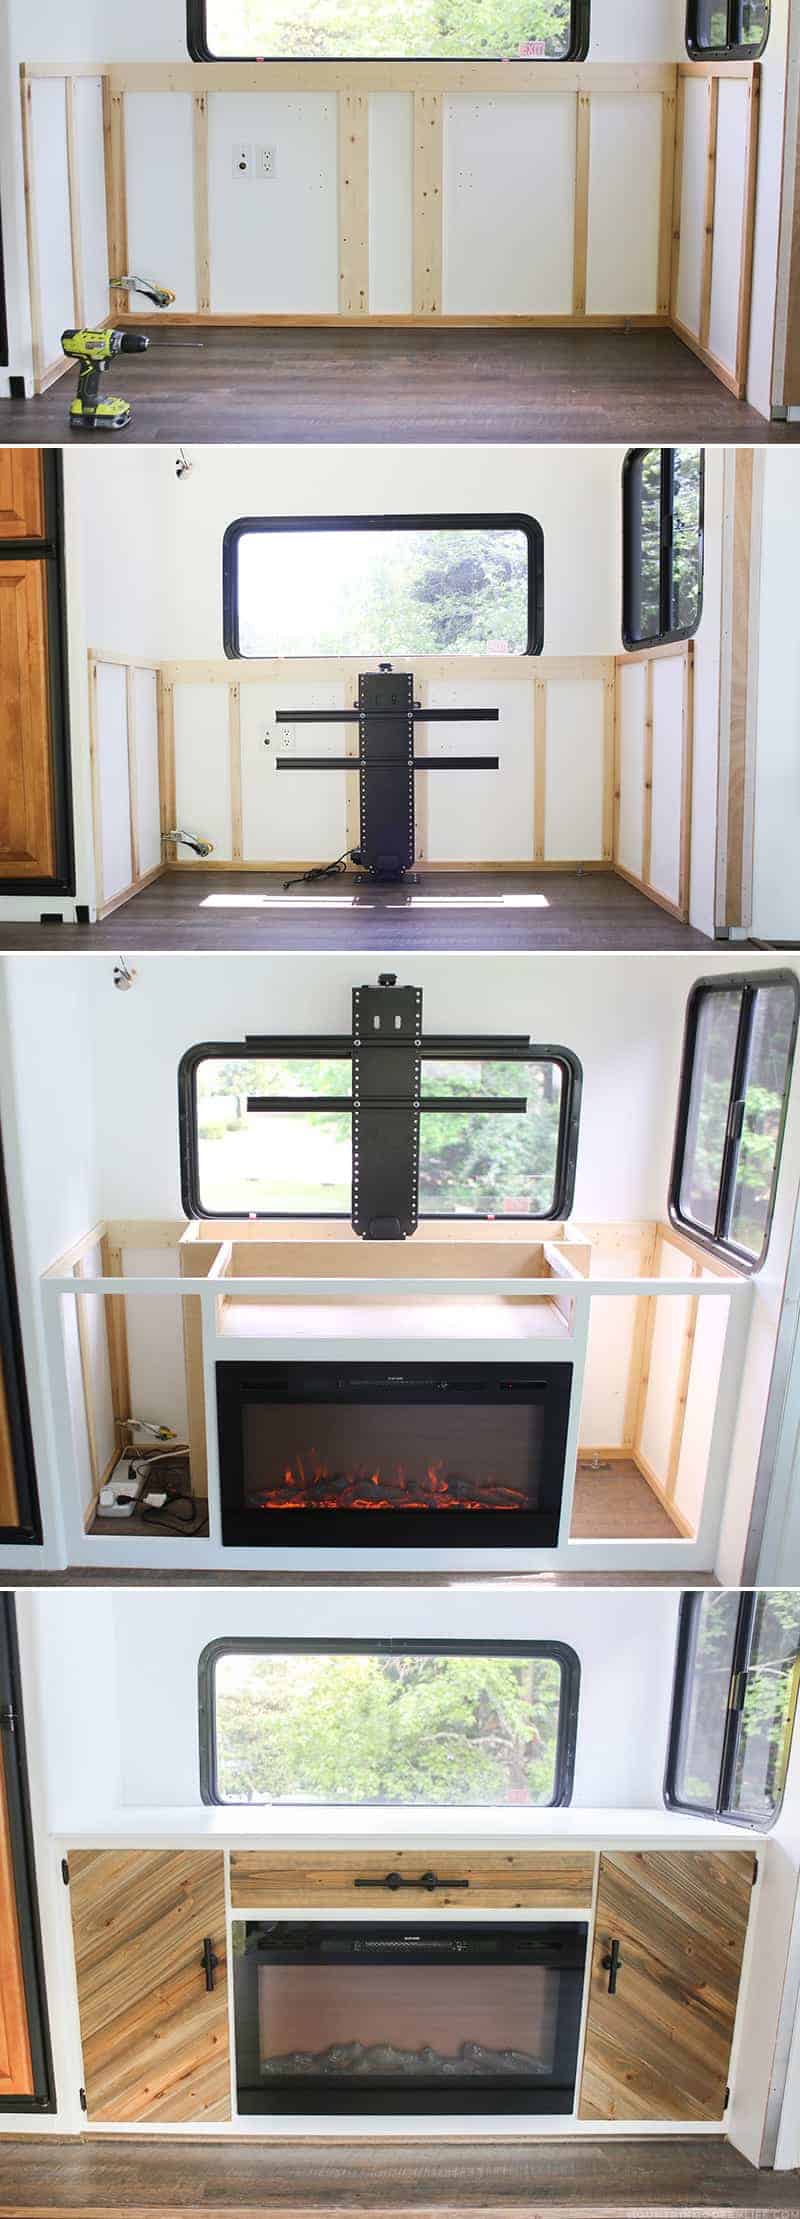 Renovating your motorhome? Come see how we're installing a hidden TV lift & electric fireplace inside our RV! MountainModernLife.com